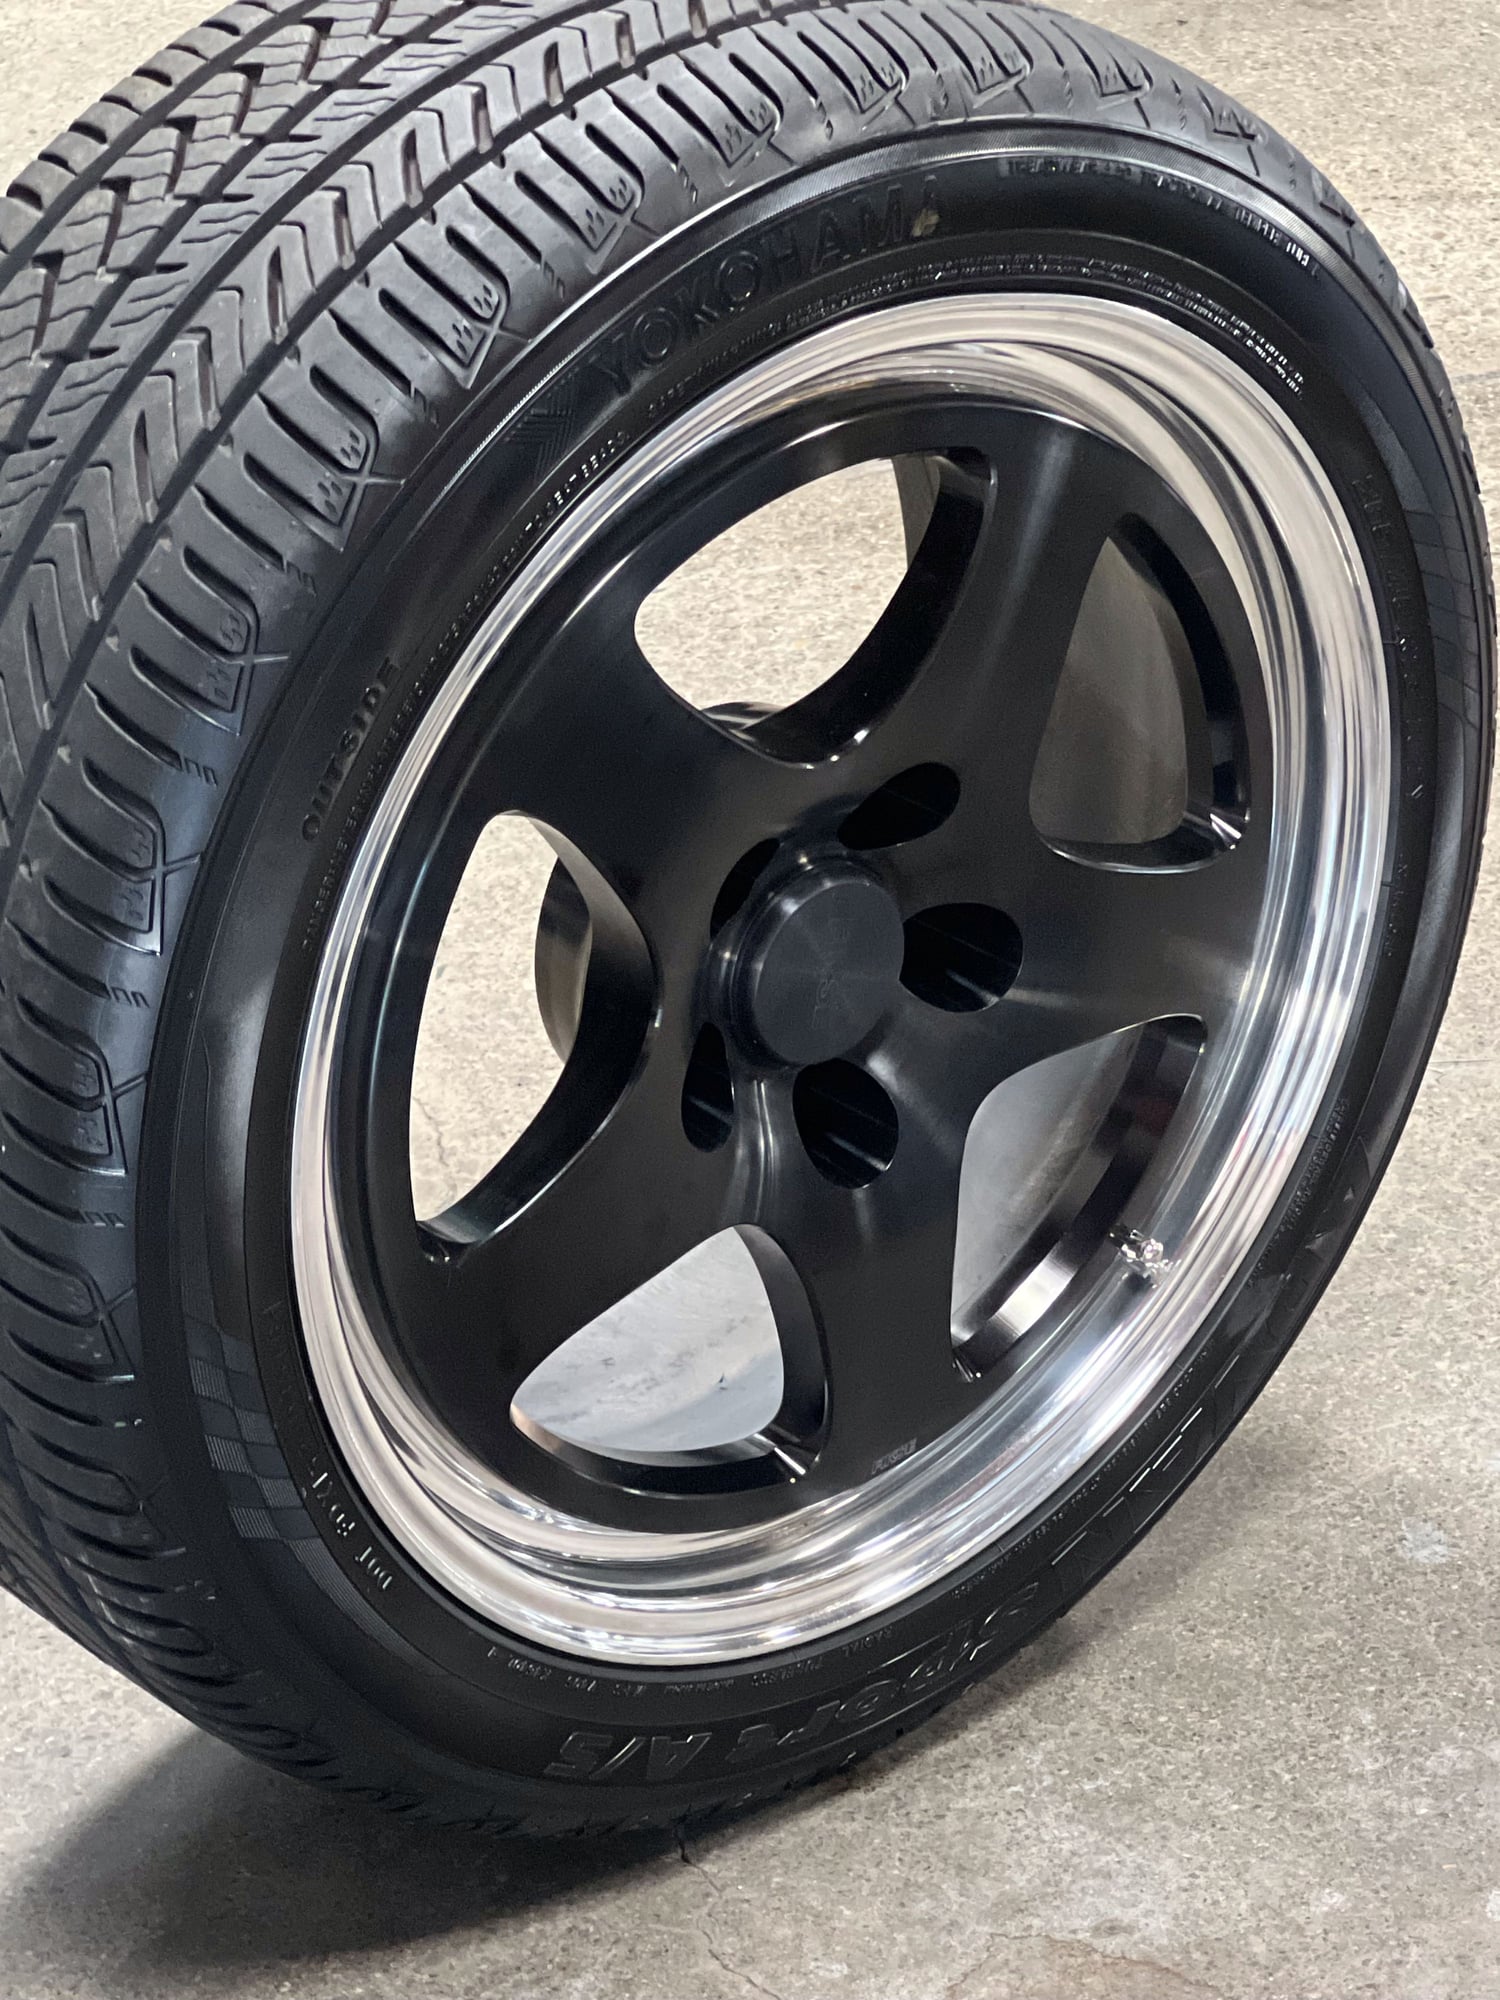 Wheels and Tires/Axles - Front Pair of 18" Fikse Wheels & Tires.  Black Anodized. - Used - 1993 to 2002 Pontiac Firebird - Walnut Creek, CA 94597, United States